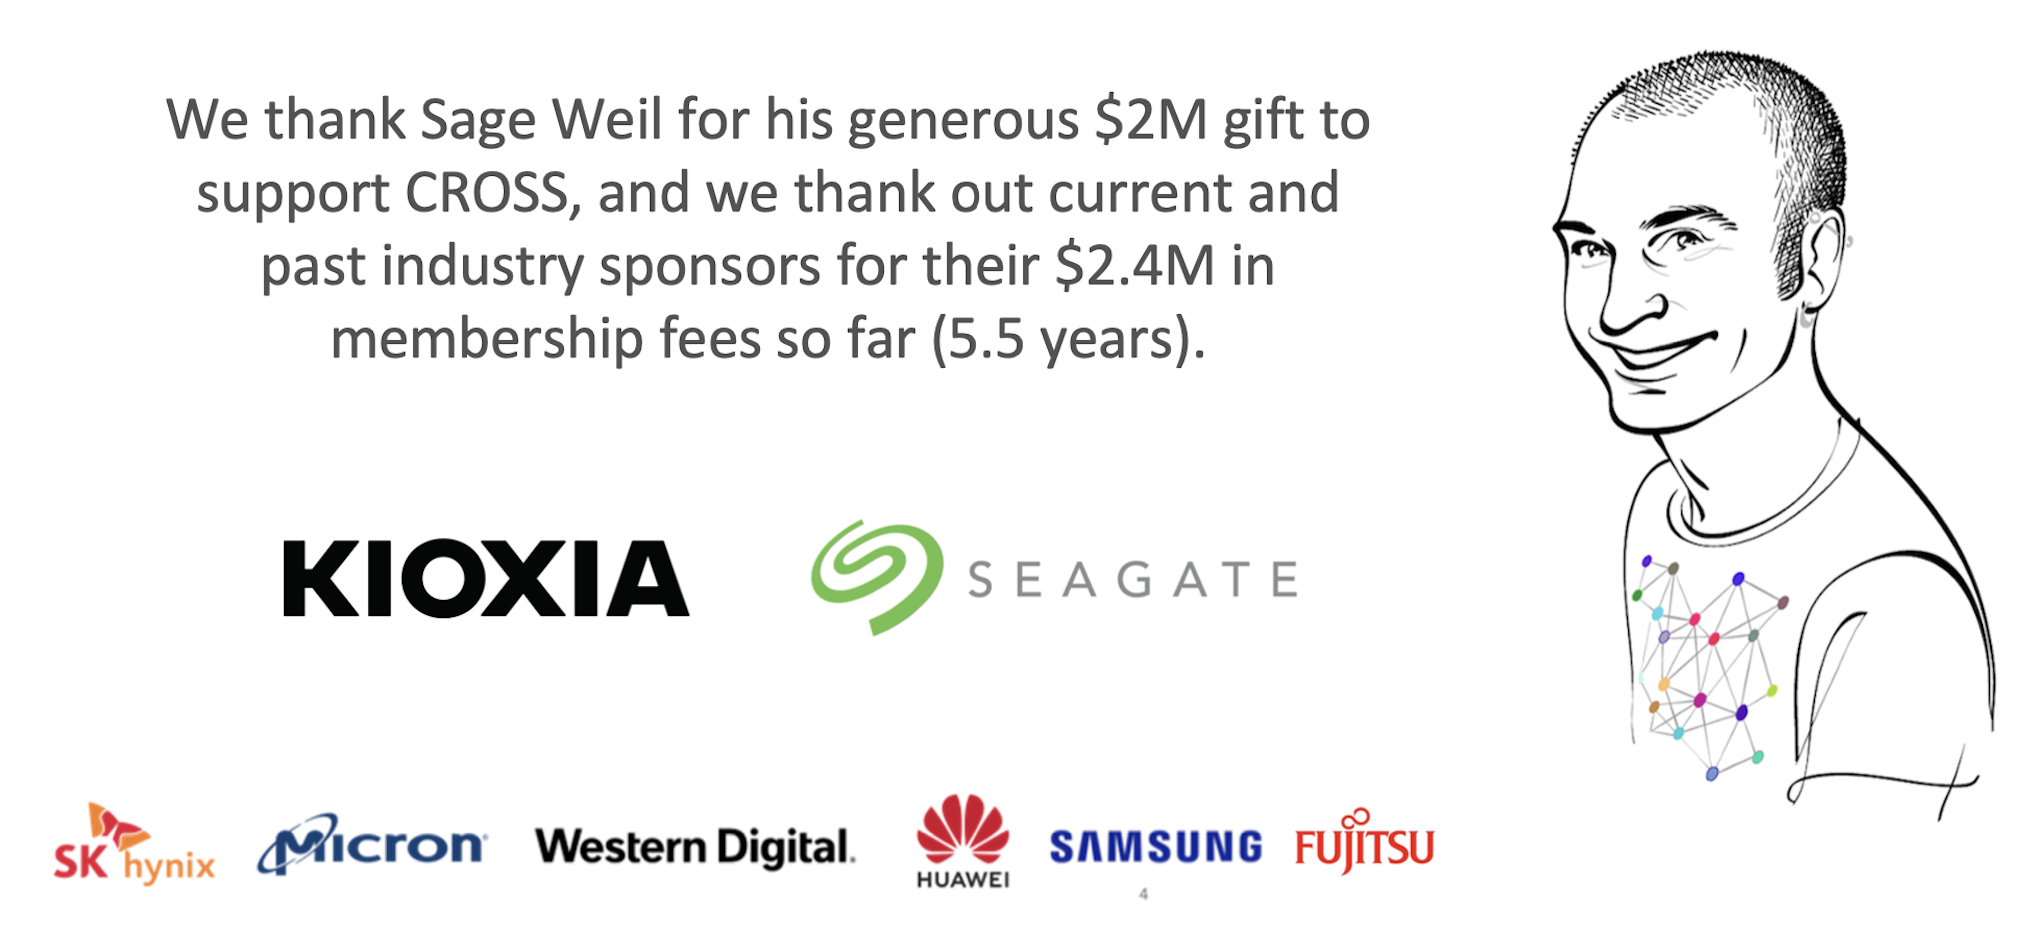 We thank Sage Weil for his generous $2M gift to support CROSS, and we thank our current and past industry sponsors: Kioxia, Seagate, Fujitsu, SK Hynix, Micron, Western Digital, Huawei, and Samsung